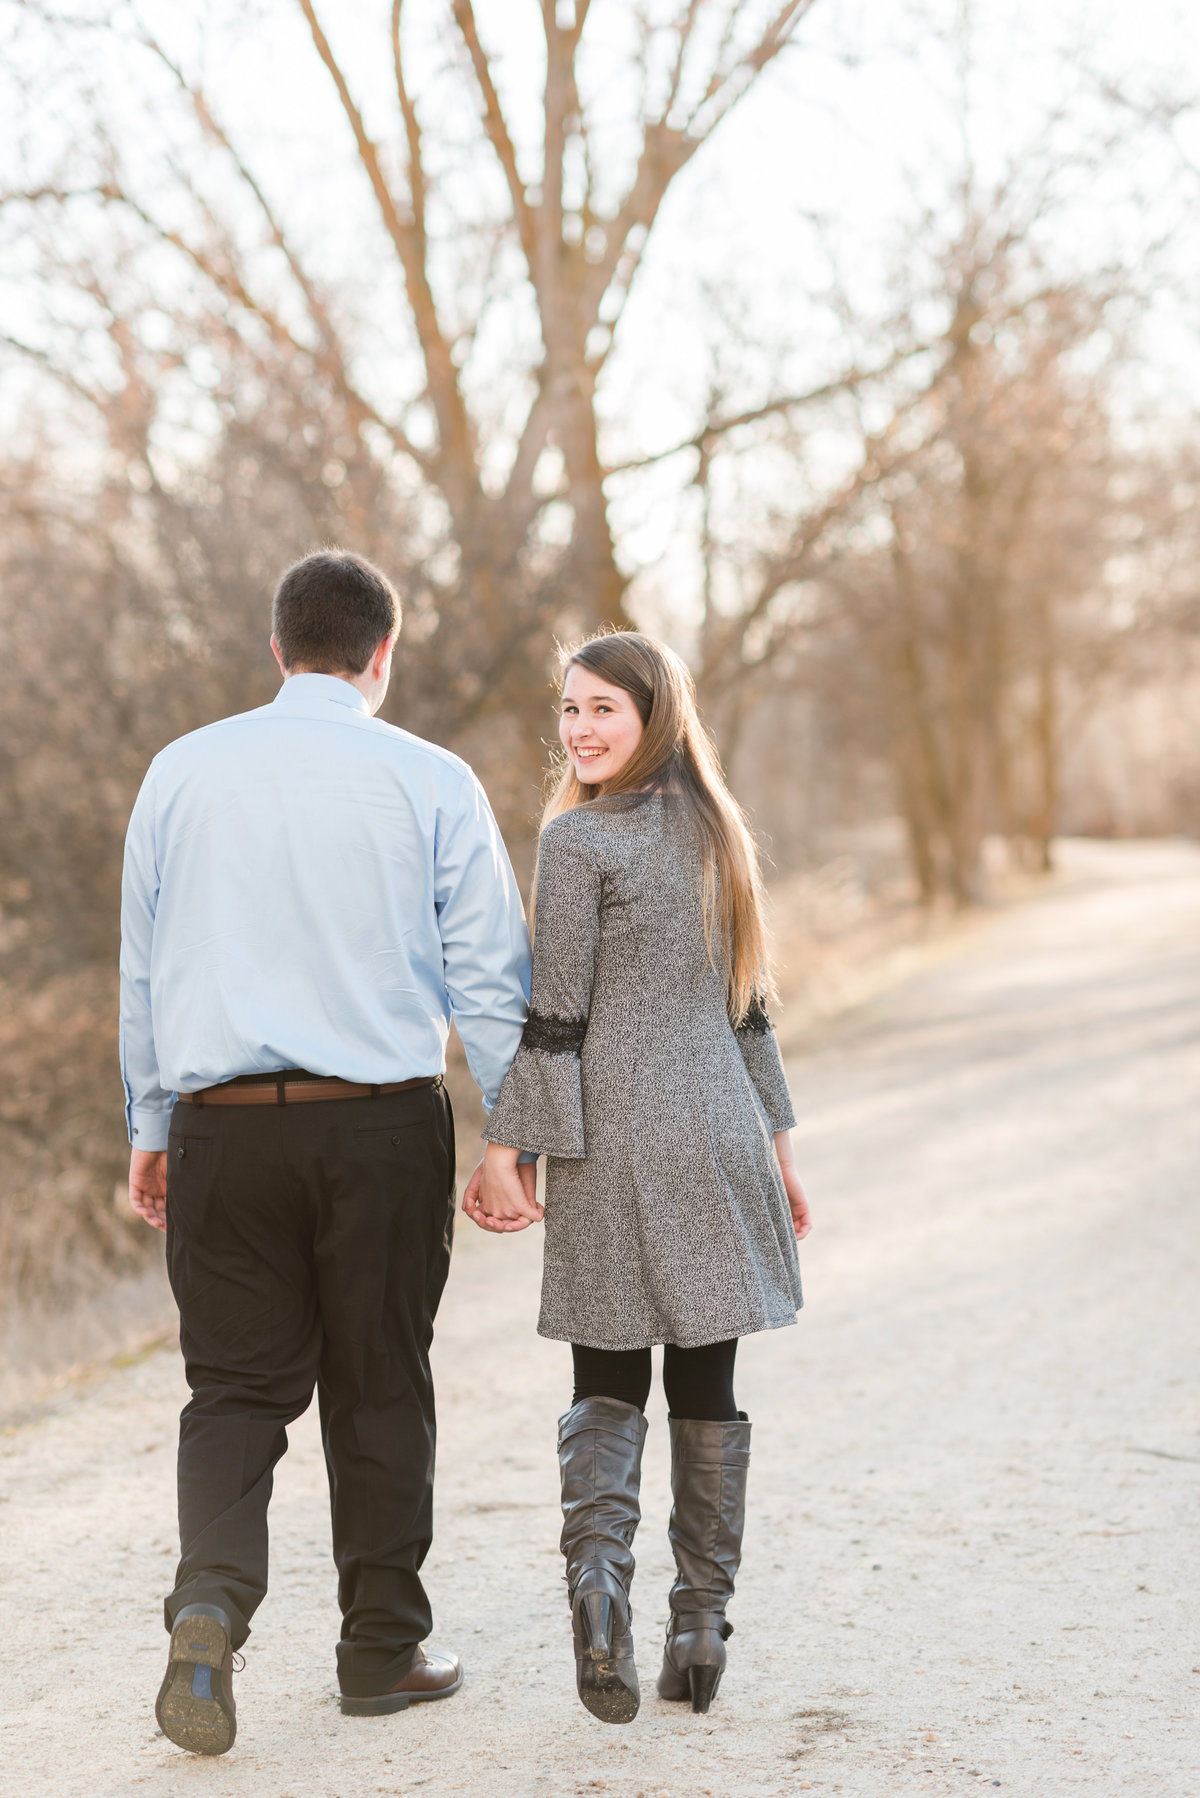 20190302 - Jannae and Forest Engagement Session 041 - A Winter Reid Merrill Park Engagement Session